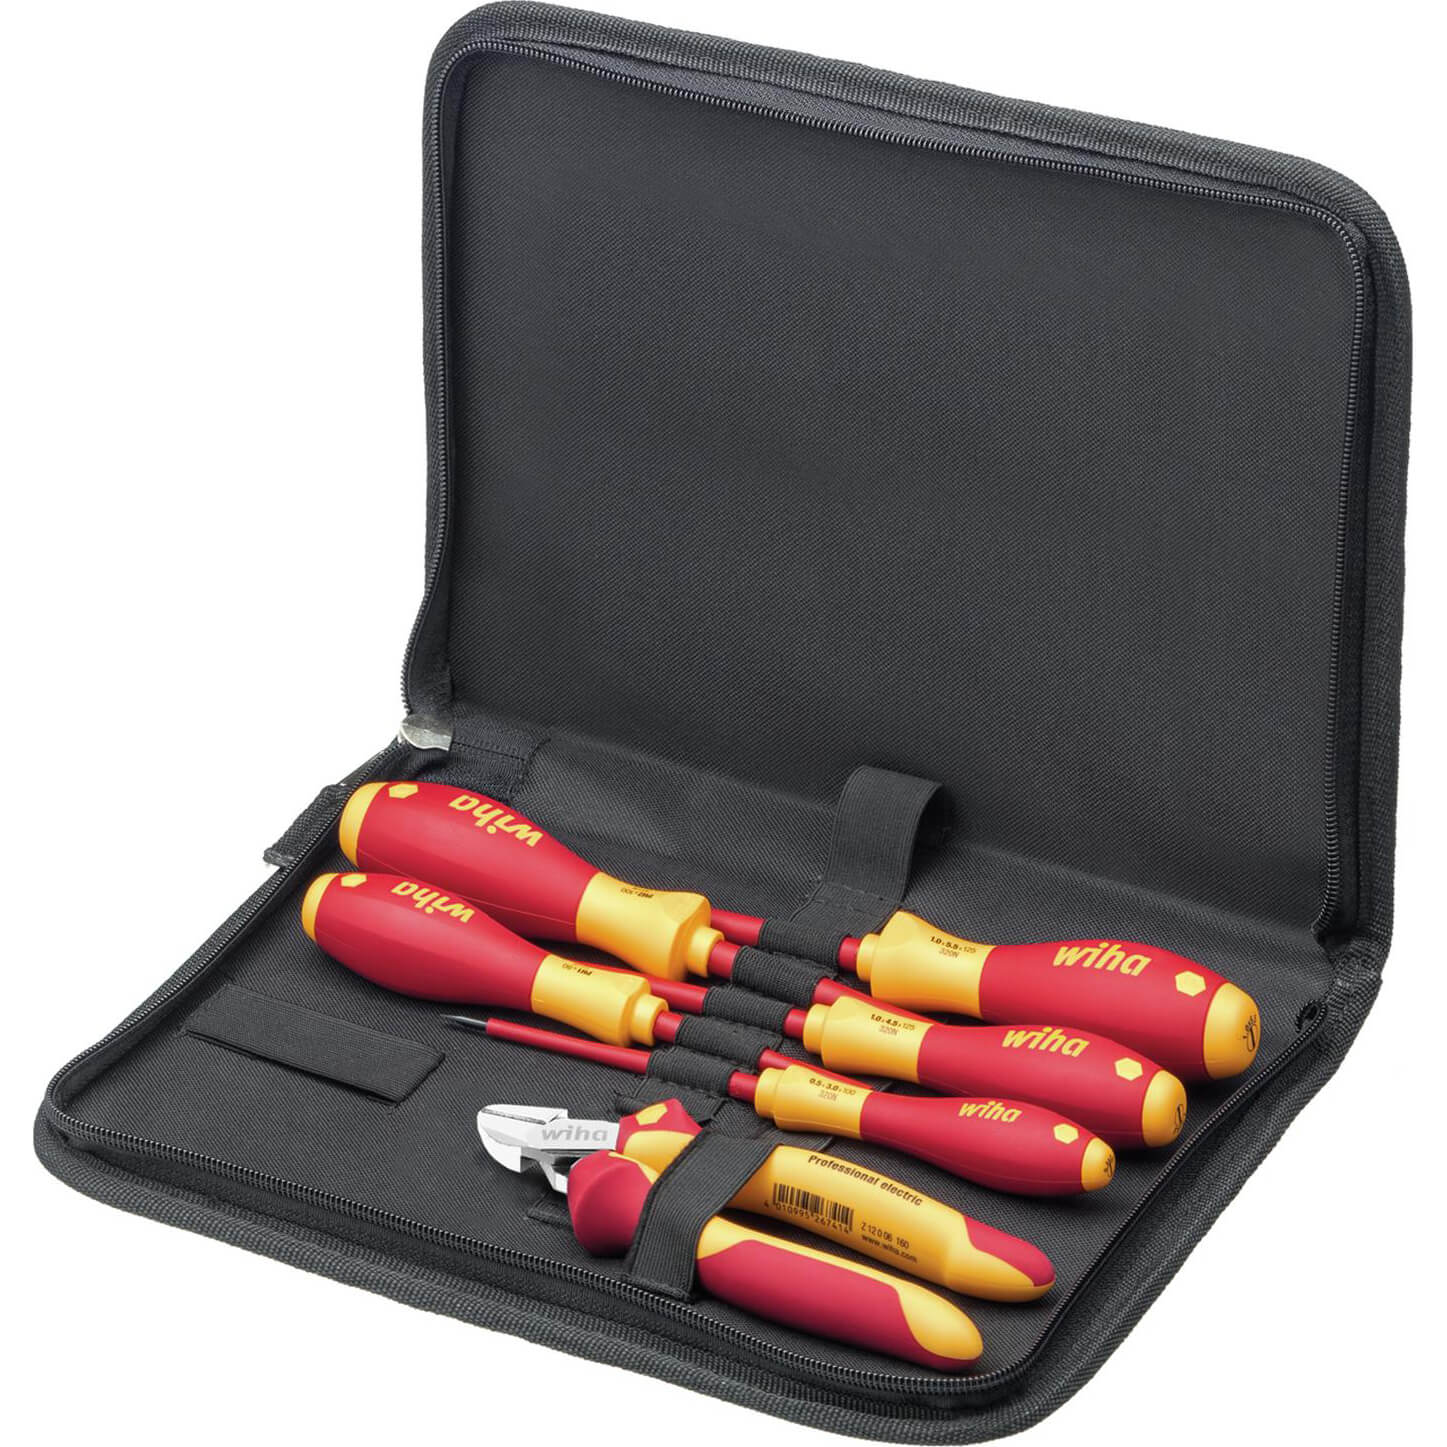 Image of Wiha 6 piece VDE Insulated Screwdriver and Side Cutters Tool Kit